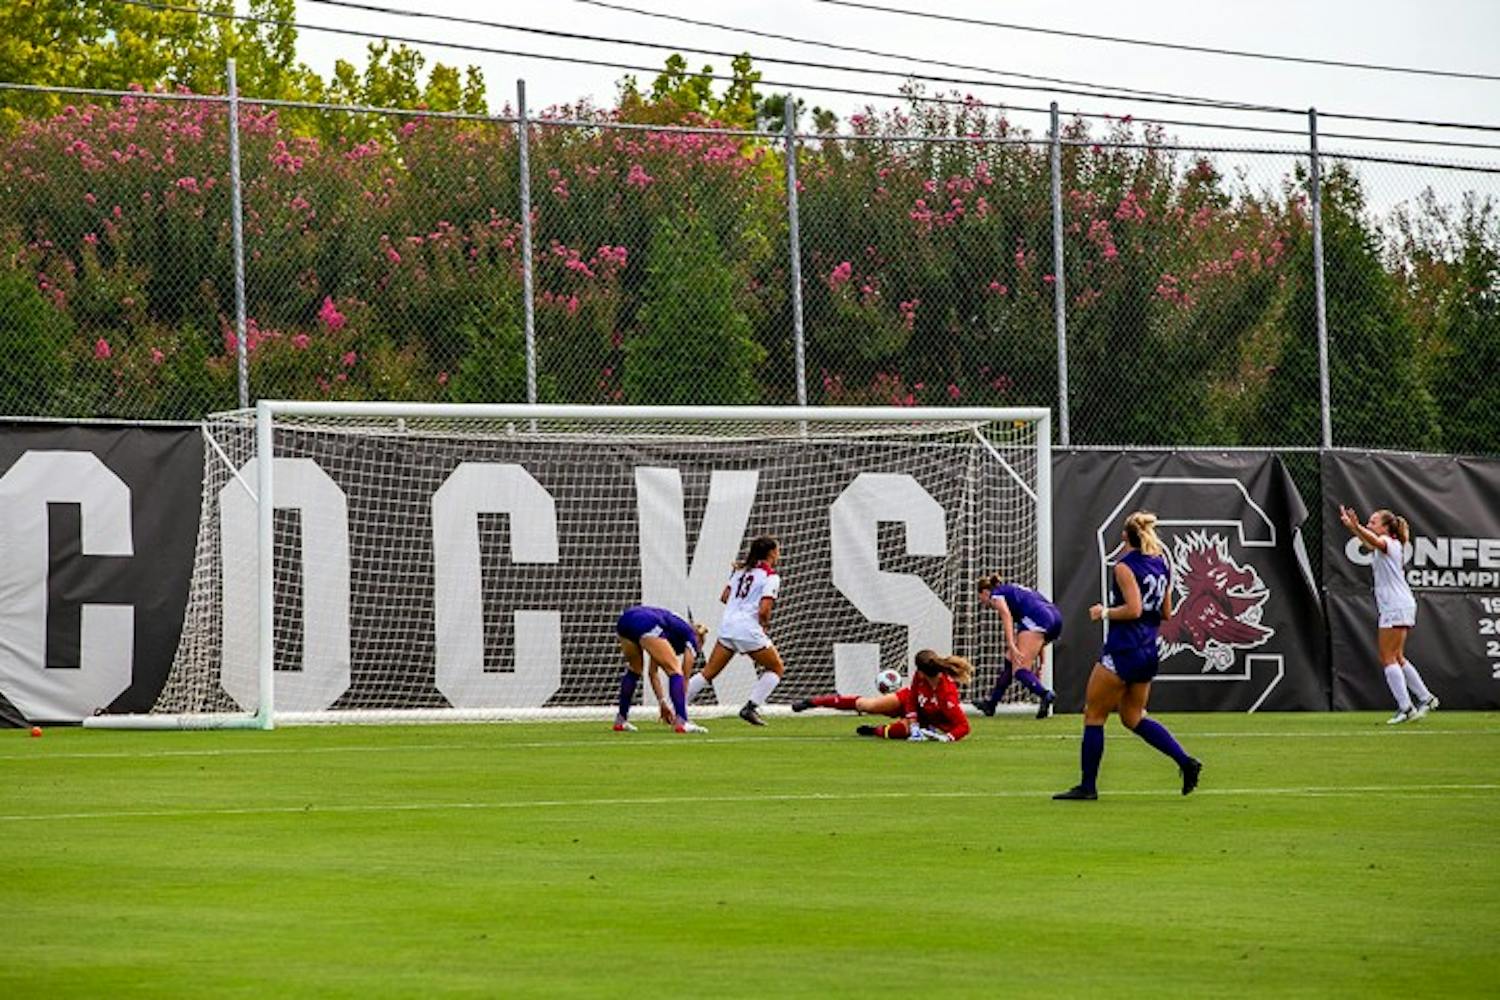 Sophomore Midfielder Megan Spiehs assisted by Junior Forward Catherine Barry score the second goal of the match on August 21, 2022. The Gamecocks beat the Pirates 2-0.